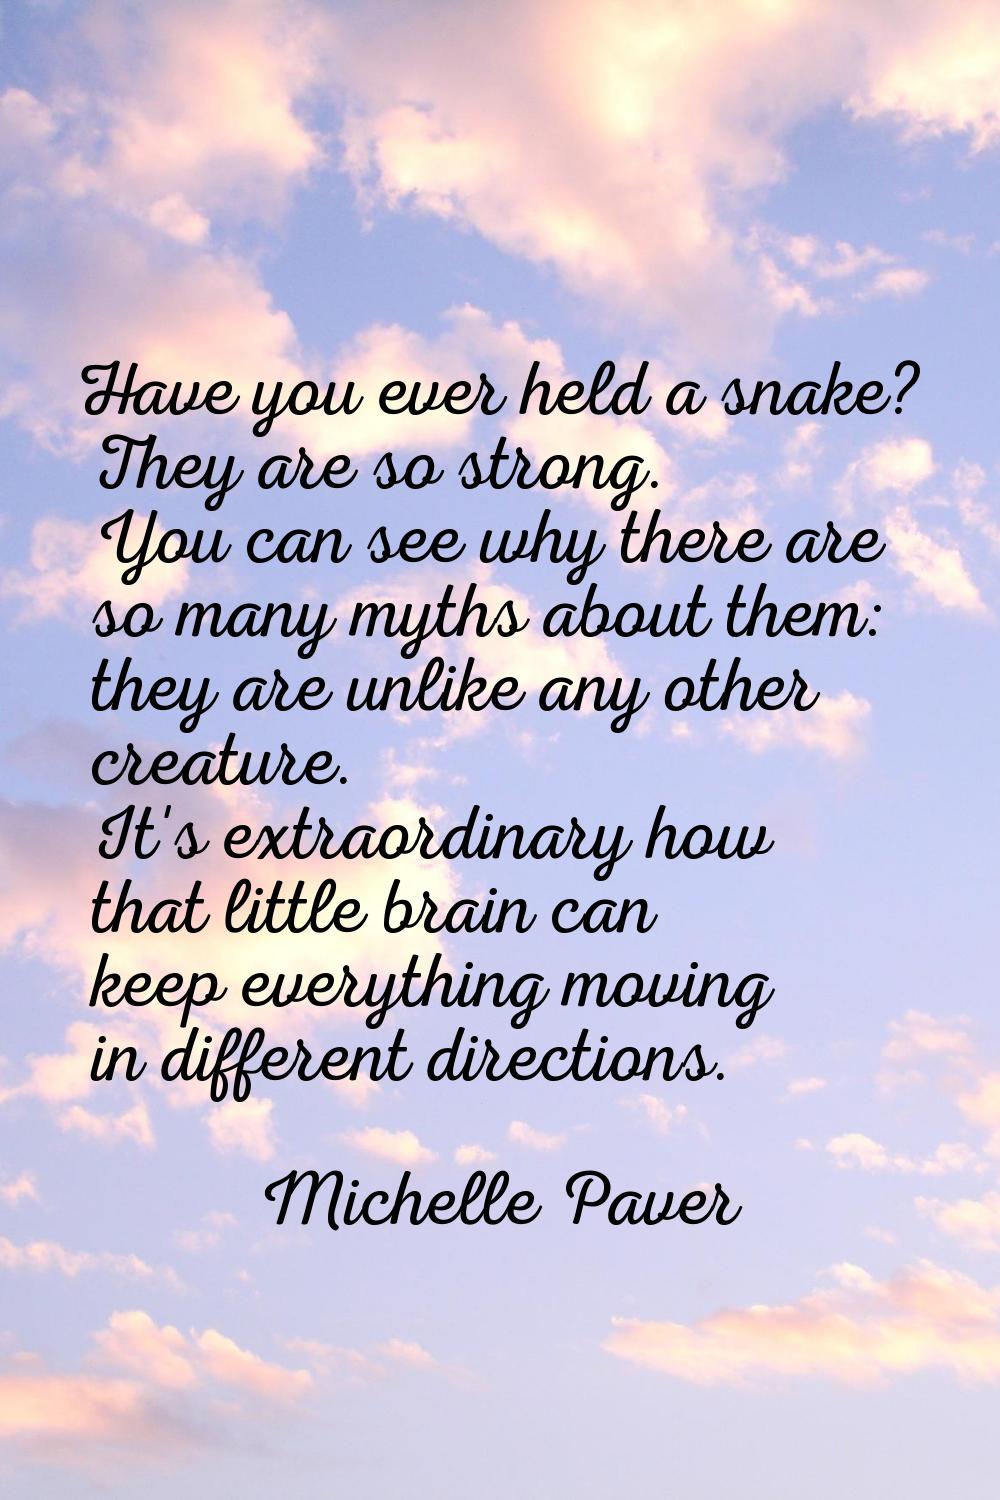 Have you ever held a snake? They are so strong. You can see why there are so many myths about them: